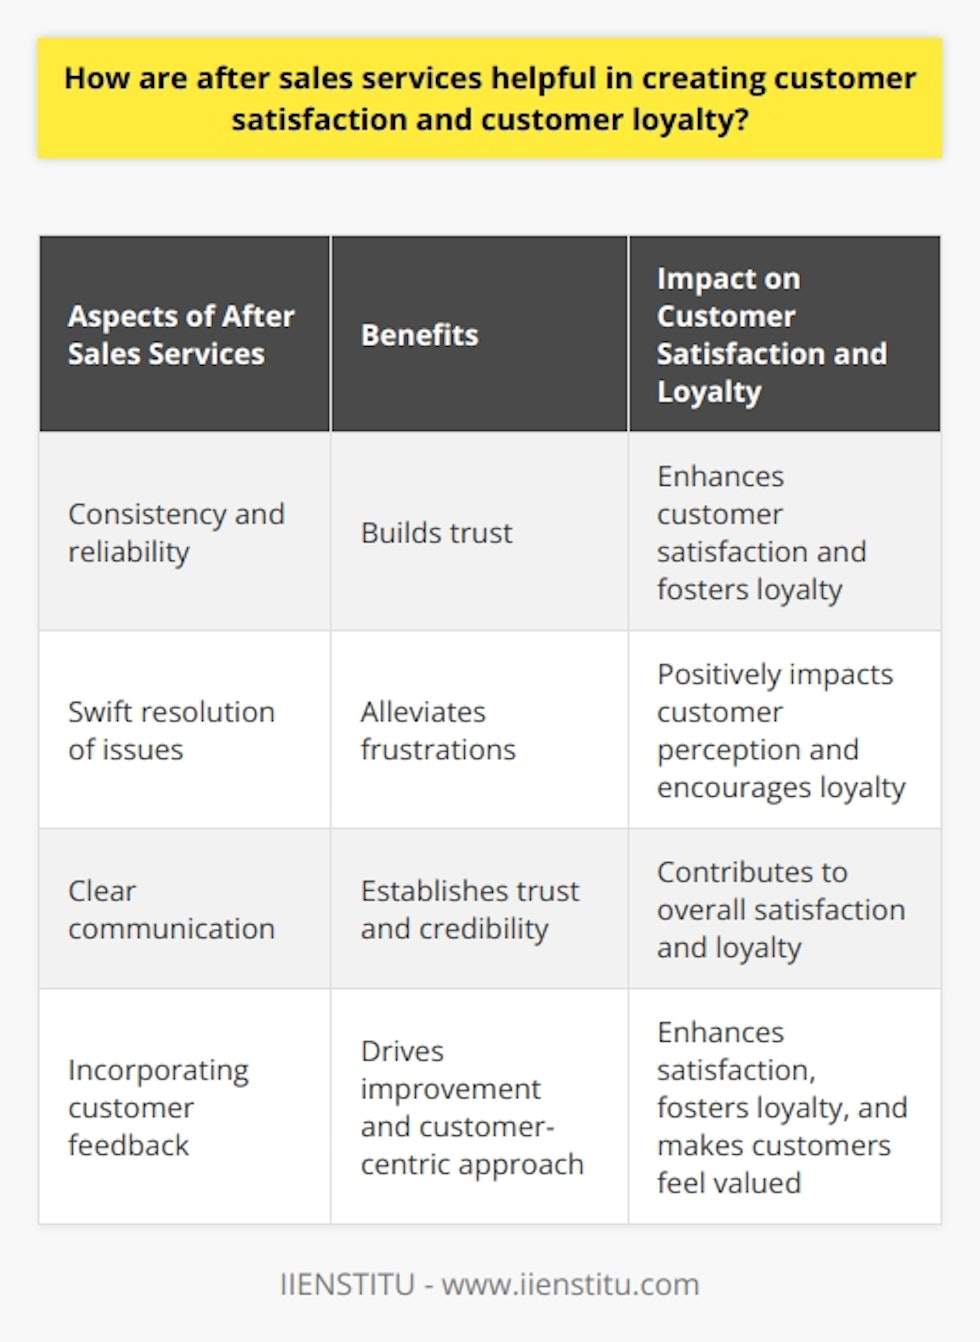 After sales services play a significant role in creating customer satisfaction and loyalty. They impact customers' overall experience with a product or service and can greatly influence their perception of a business. By providing timely assistance, support, and guidance, businesses can ensure positive experiences for their customers, ultimately leading to increased satisfaction and loyalty.Consistency and reliability in support are crucial aspects of after sales services. Customers value knowing that they can consistently rely on a business to address their concerns and resolve any issues they may have. By offering efficient and dependable assistance, businesses can enhance customer satisfaction and build trust, which in turn fosters loyalty.The swift resolution of issues is another important component of after sales services. Promptly addressing customer concerns and providing solutions not only helps alleviate their frustrations, but also demonstrates a company's dedication to their satisfaction. When customer issues are resolved in a timely manner, it positively impacts their perception of the business and encourages them to remain loyal in the long run.Clear communication is vital in any successful after sales service. Keeping customers informed about the progress and status of their queries or concerns establishes trust and credibility. Transparent communication also helps manage customer expectations, further contributing to overall satisfaction and loyalty. By consistently providing clear information, businesses can ensure that customers feel informed and valued.Furthermore, incorporating customer feedback into the after sales services allows businesses to continuously improve and better cater to their customers' needs. Actively seeking and implementing feedback demonstrates a company's commitment to providing exceptional customer experiences. This responsiveness to customer input not only drives satisfaction but also fosters a sense of loyalty, as customers feel valued and listened to.In conclusion, effective after sales services are essential for creating customer satisfaction and loyalty. By offering consistent and reliable support, swiftly resolving issues, communicating clearly, and incorporating customer feedback, businesses can build strong relationships with their customers and foster lasting loyalty. These aspects of after sales services contribute to positive customer experiences and ultimately enhance a business's reputation and success.